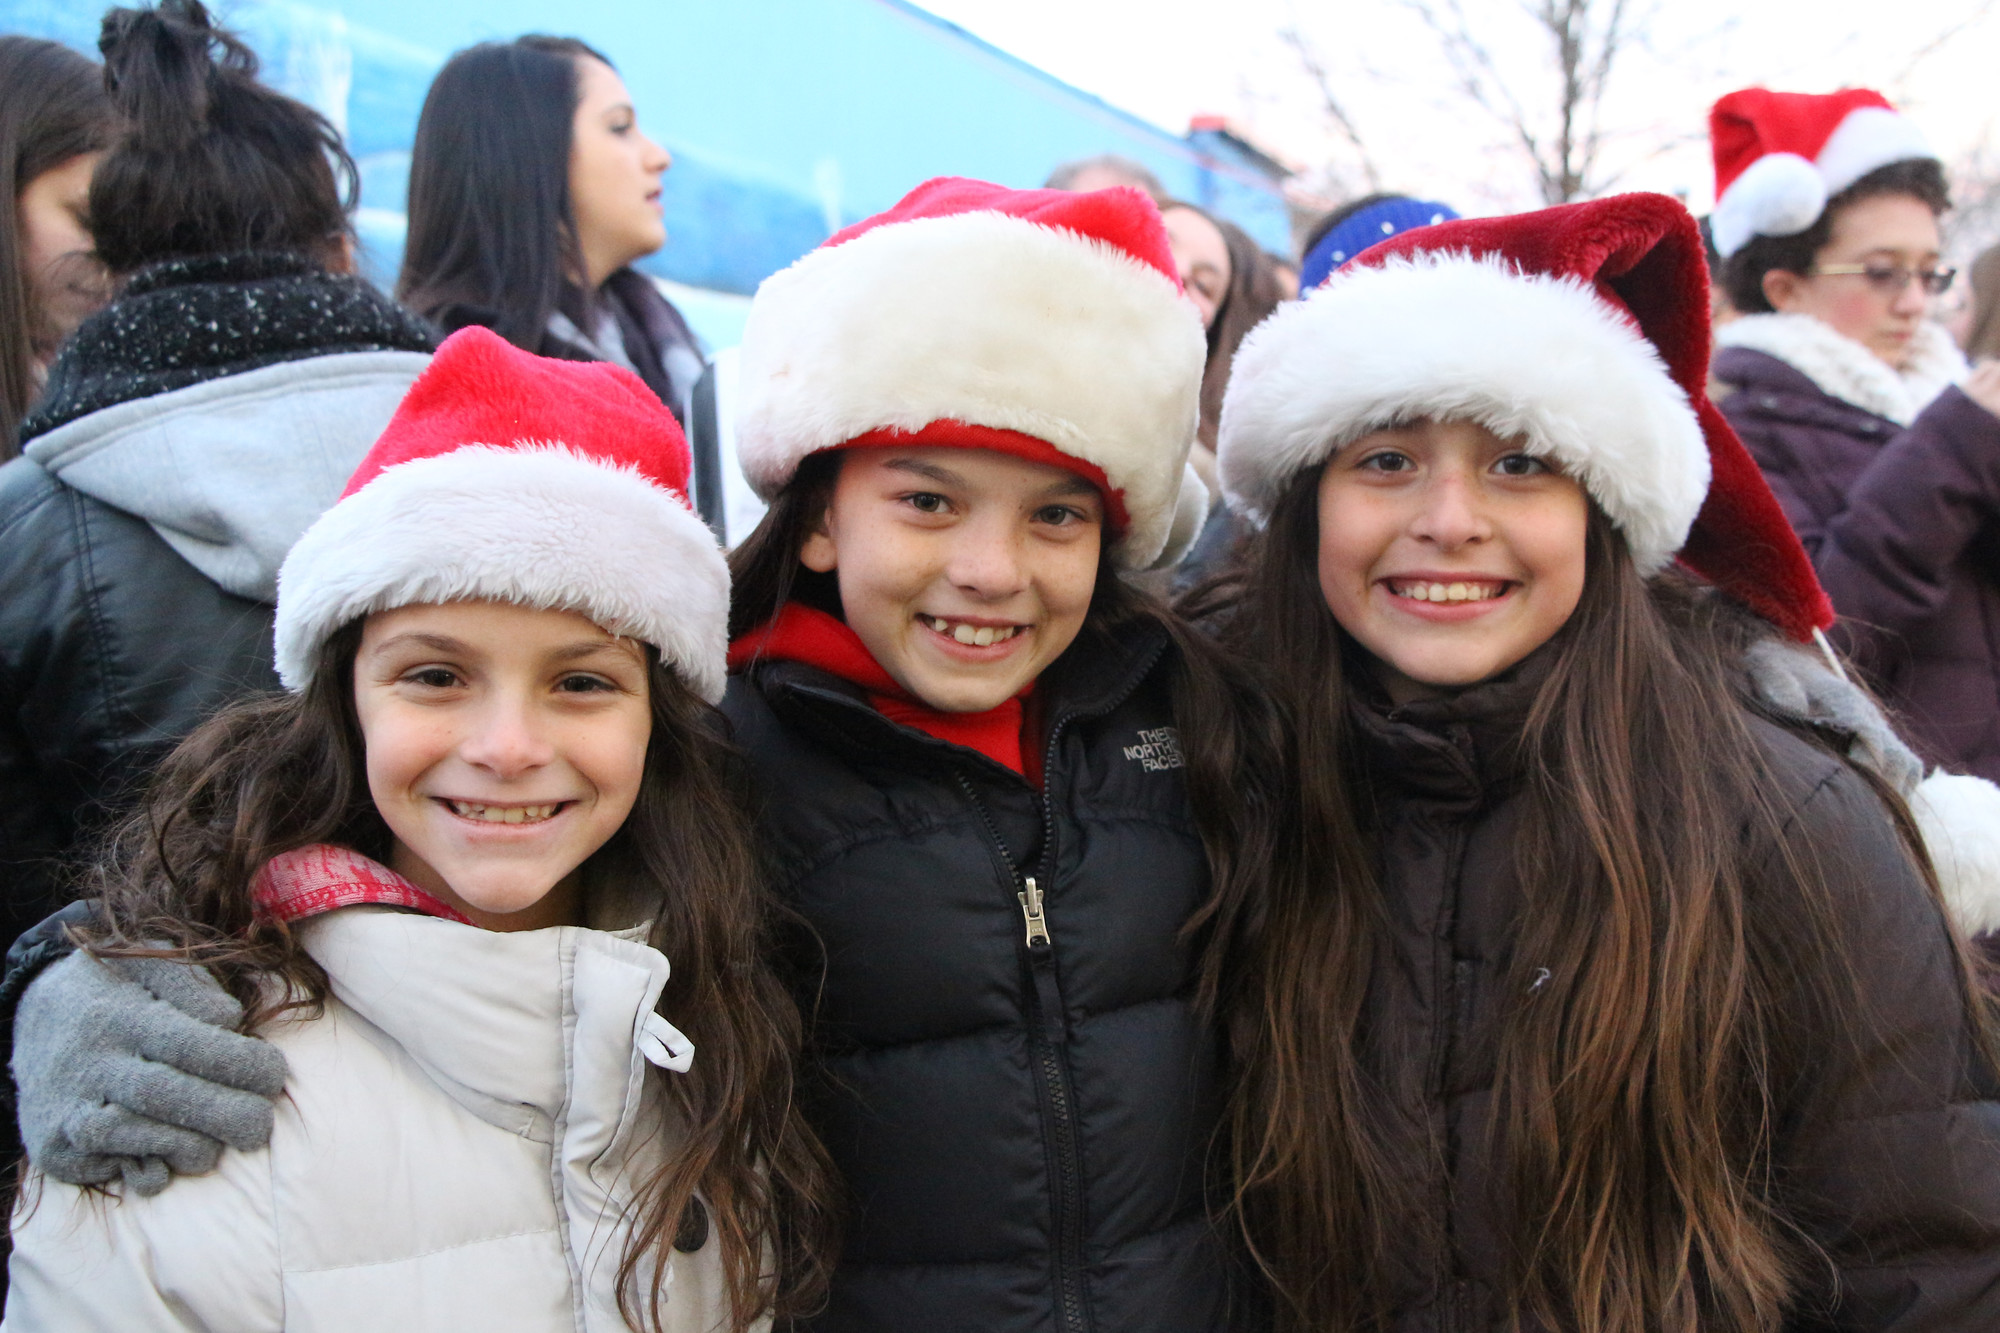 Monica Dell-Olio, Jade McAlevey and Sophia Cano, all 9, looked the part at the holiday event.